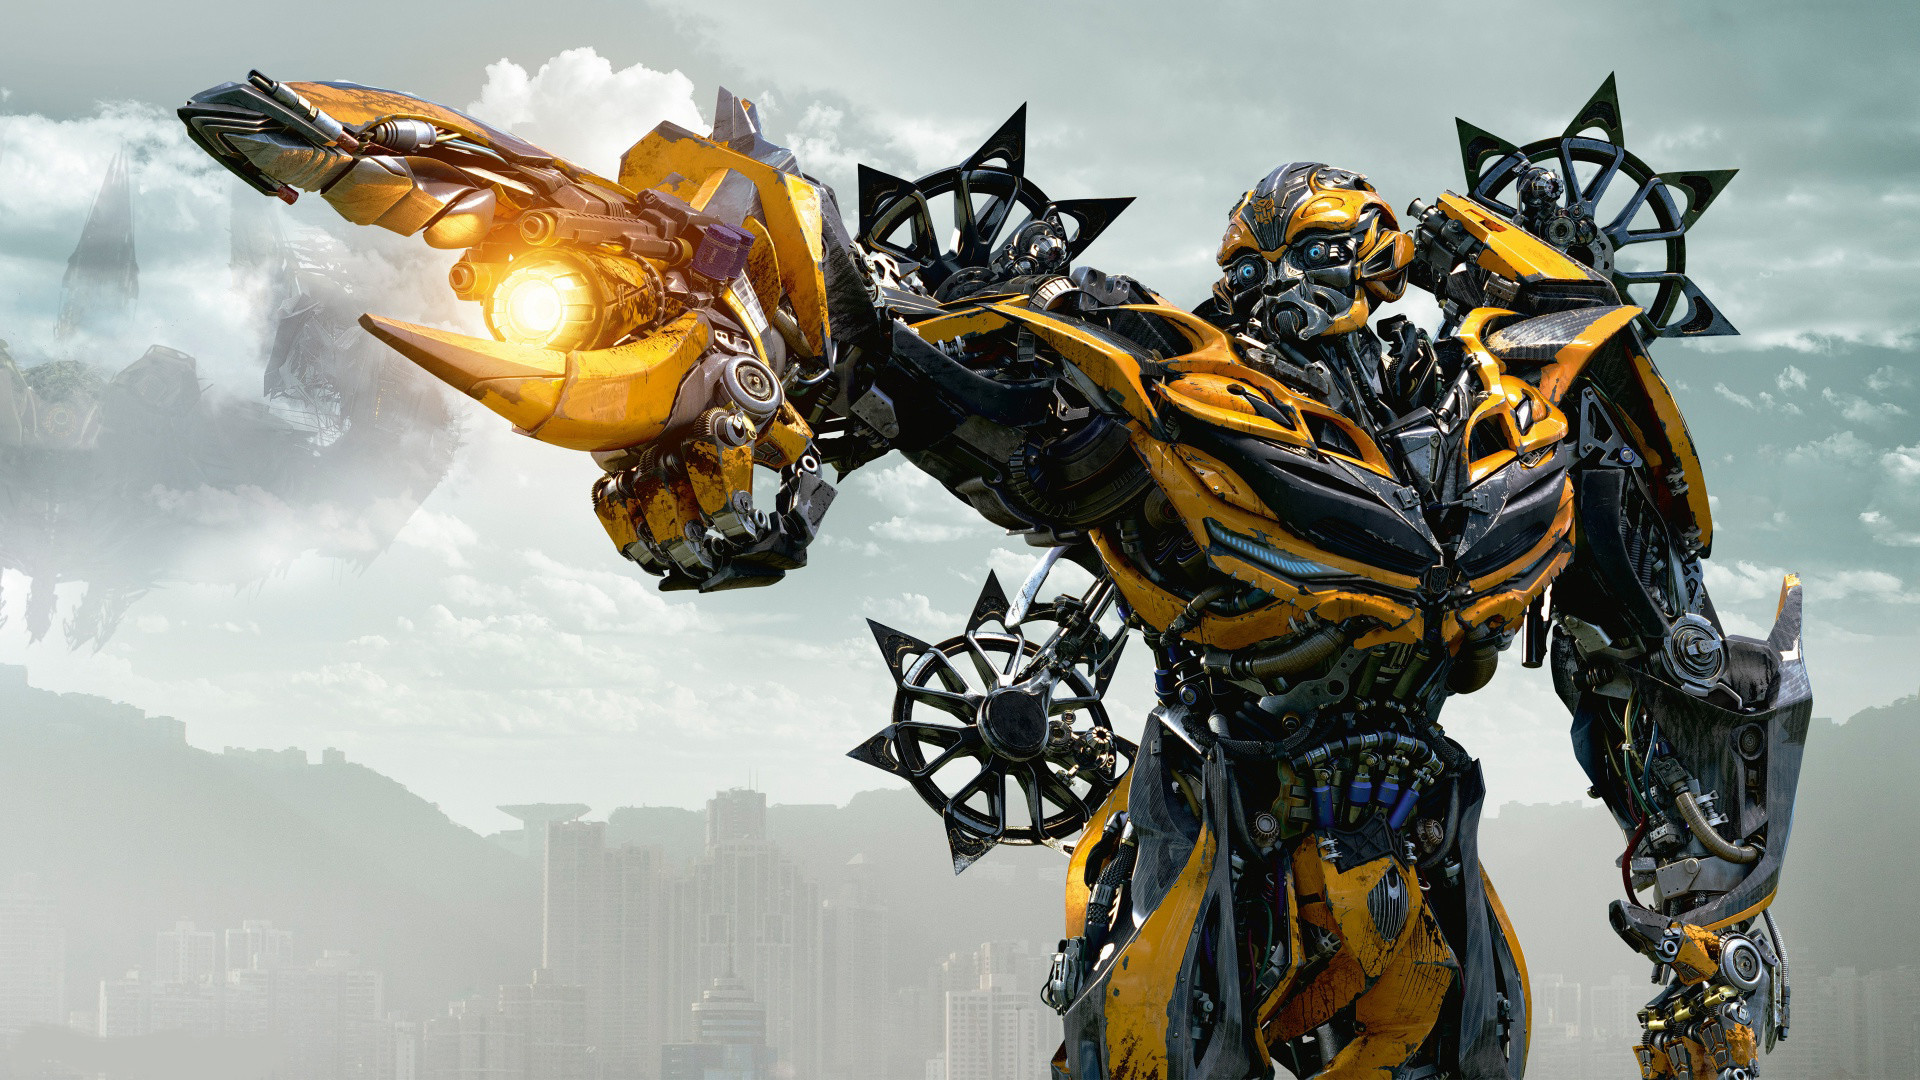 1920x1080  Transformers-4-Age-of-Extinction-Bumblebee-protector-wallpaper-